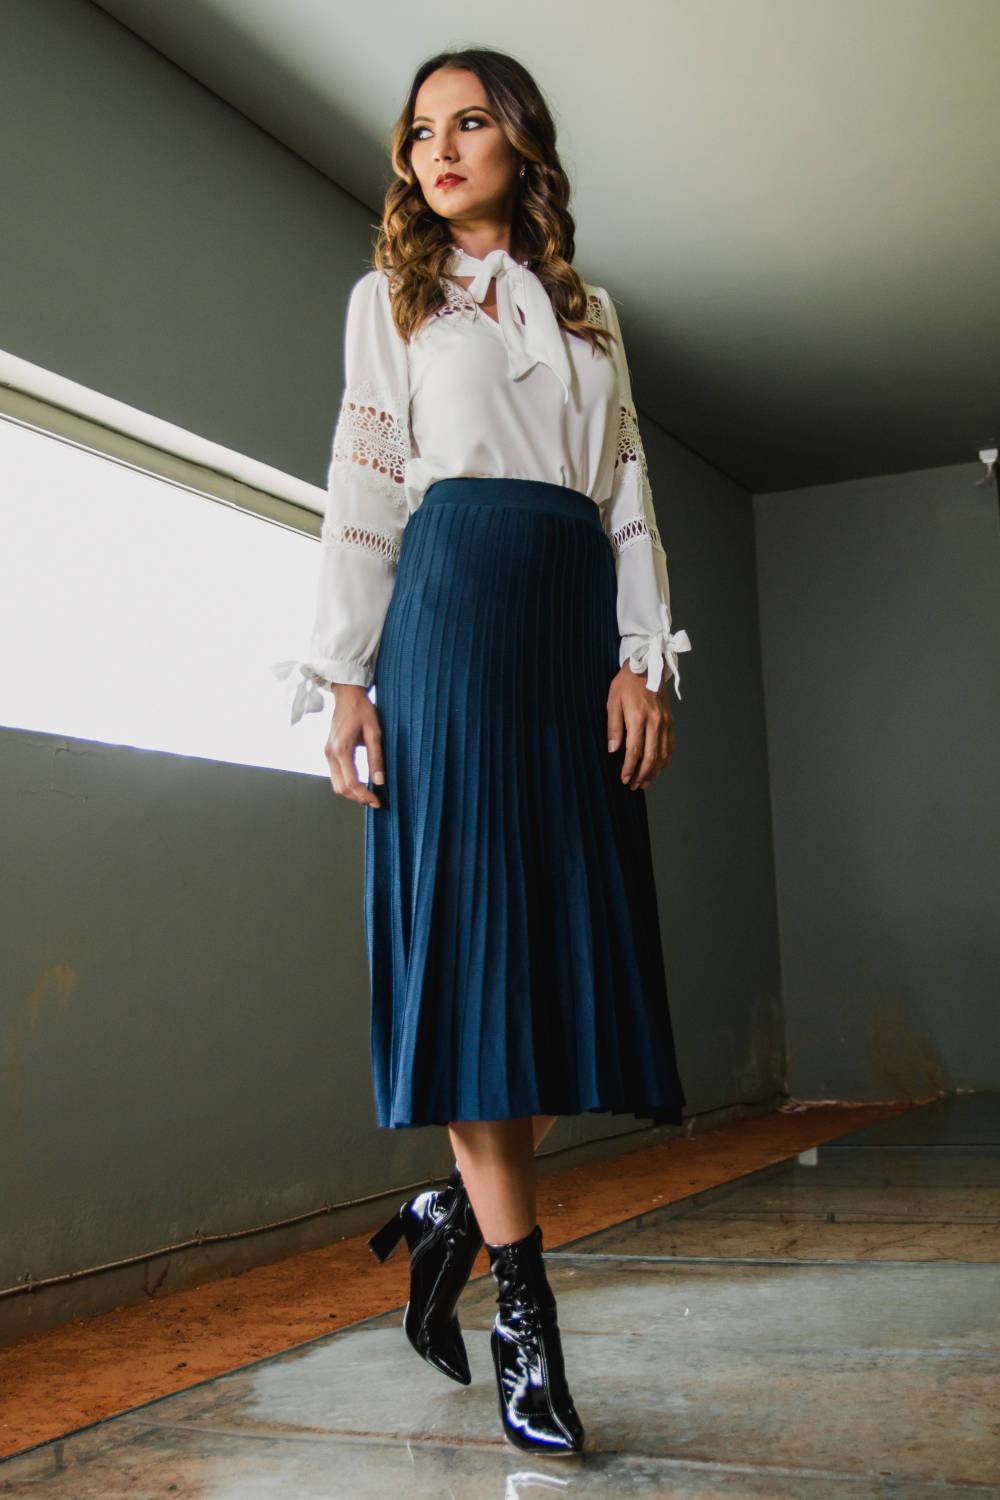 university interview outfit pleated skirt